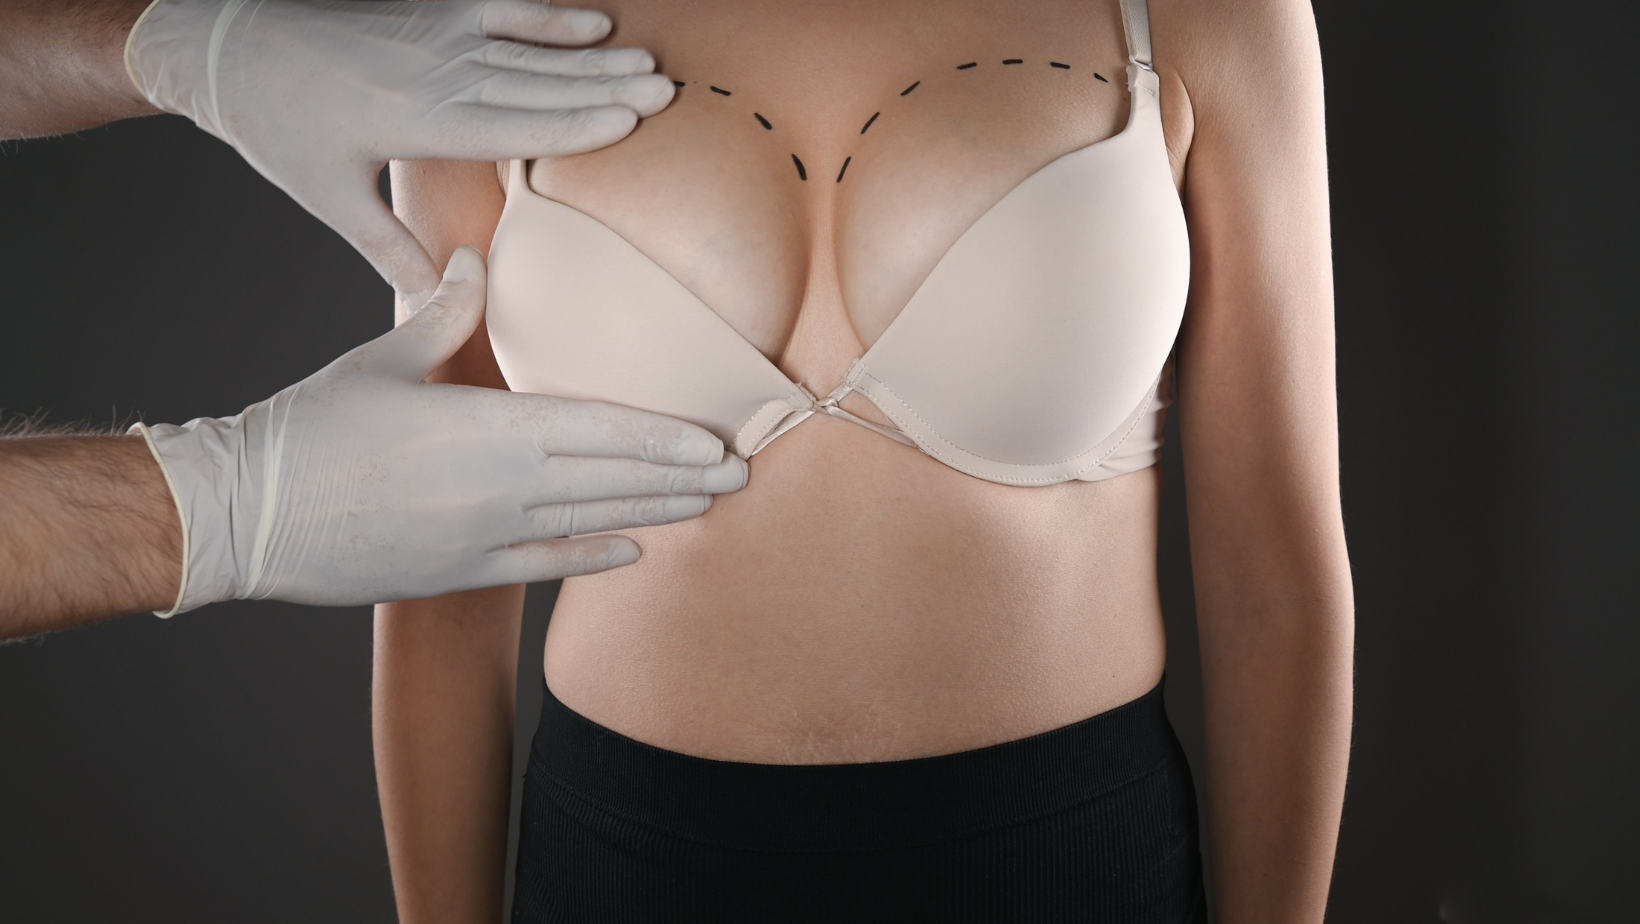 Breast Augmentation: Medical Terms to Know